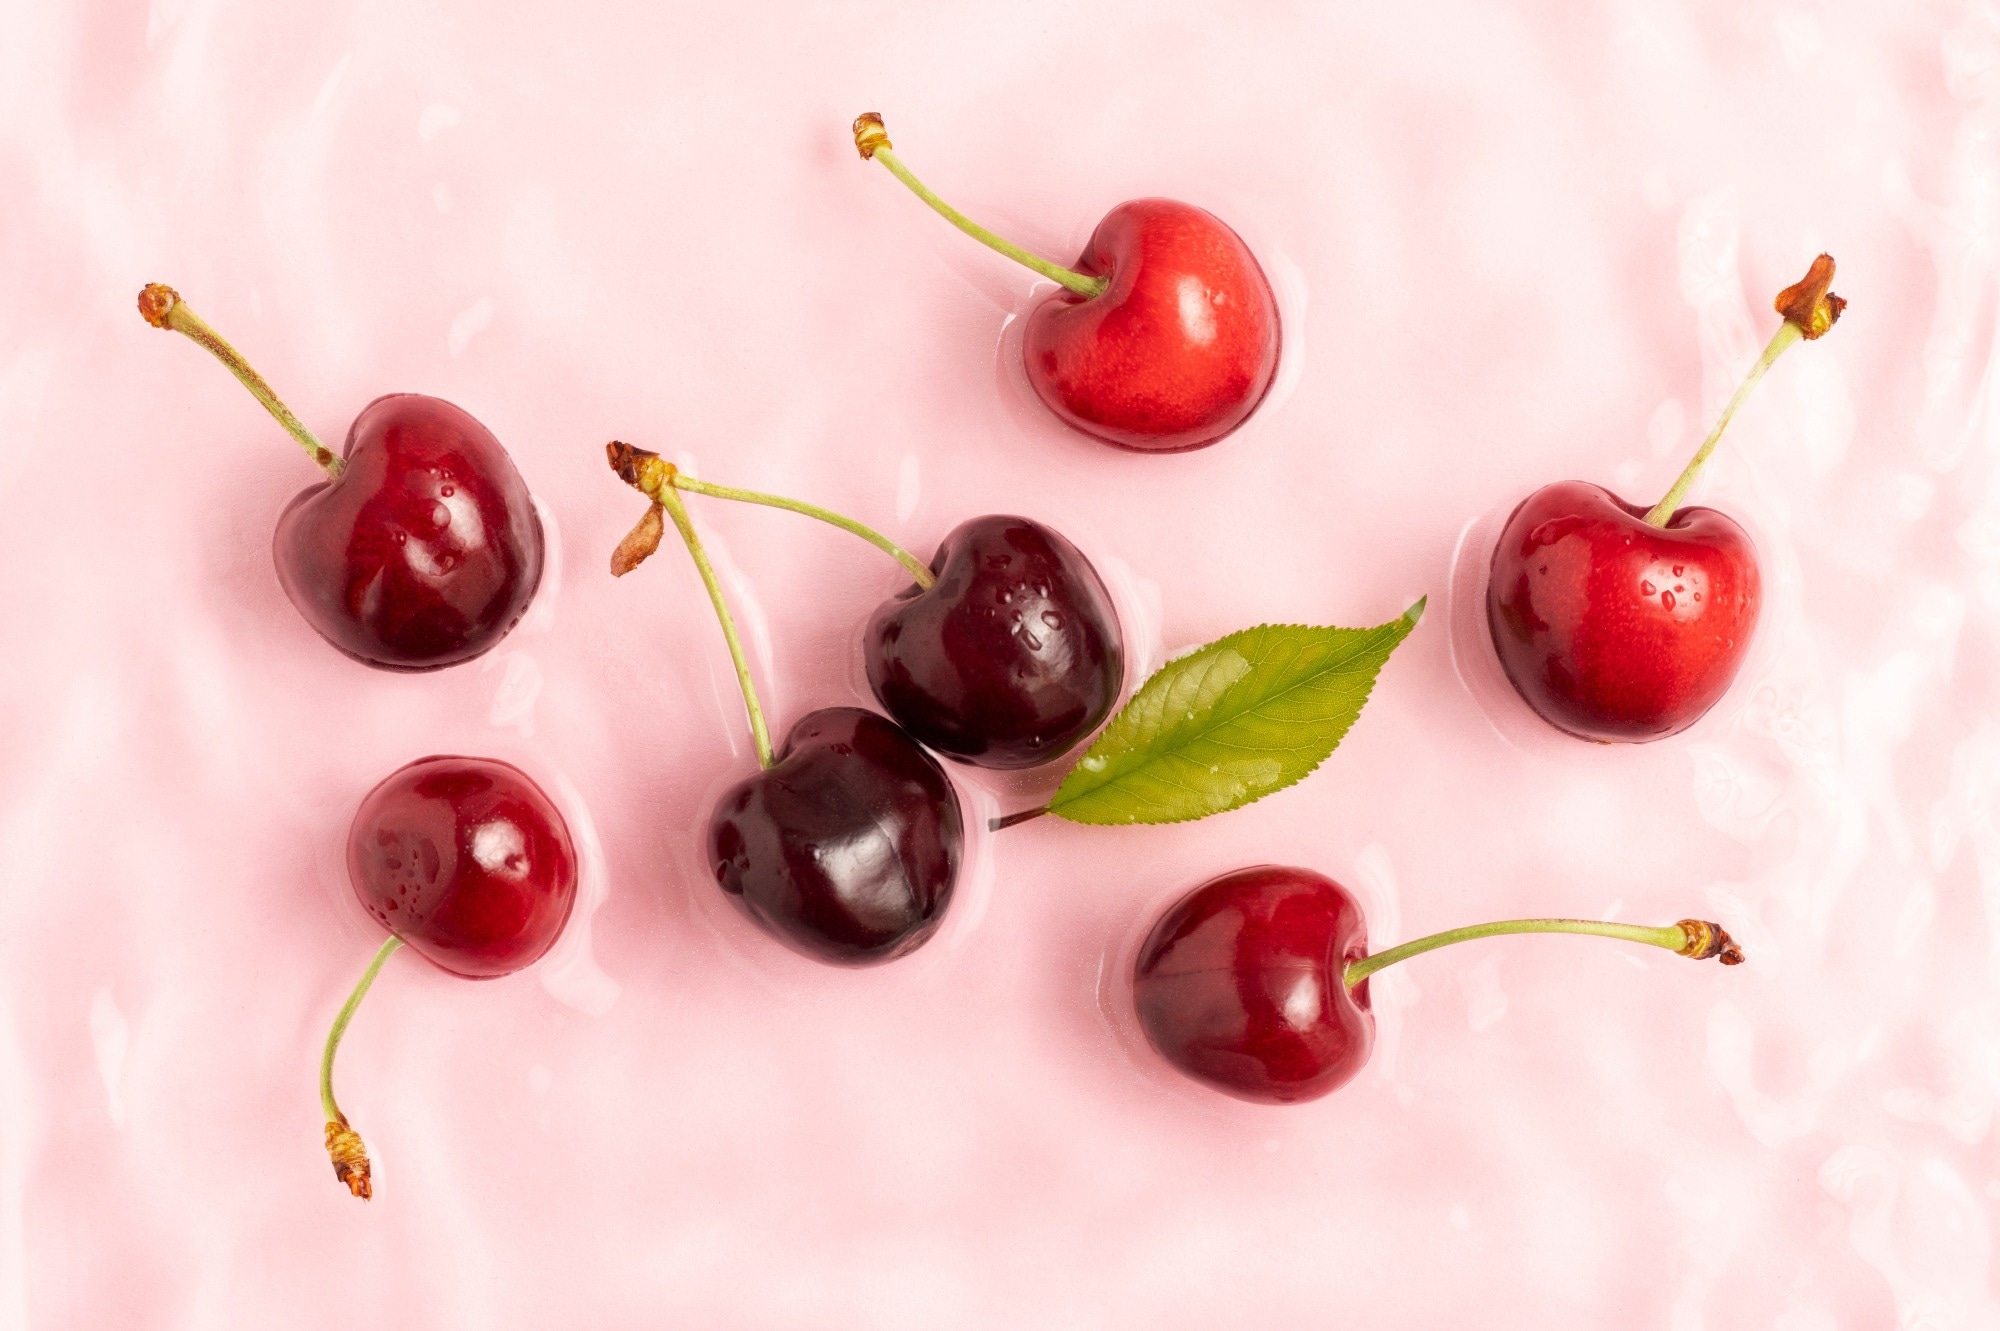 Research: Tart cherry (Prunus cerasus L.) pit extract protects human skin cells from oxidative stress: enabling sustainable use of food industry by-products. Image credit: Serhii Ivashchuk / Shutterstock.com